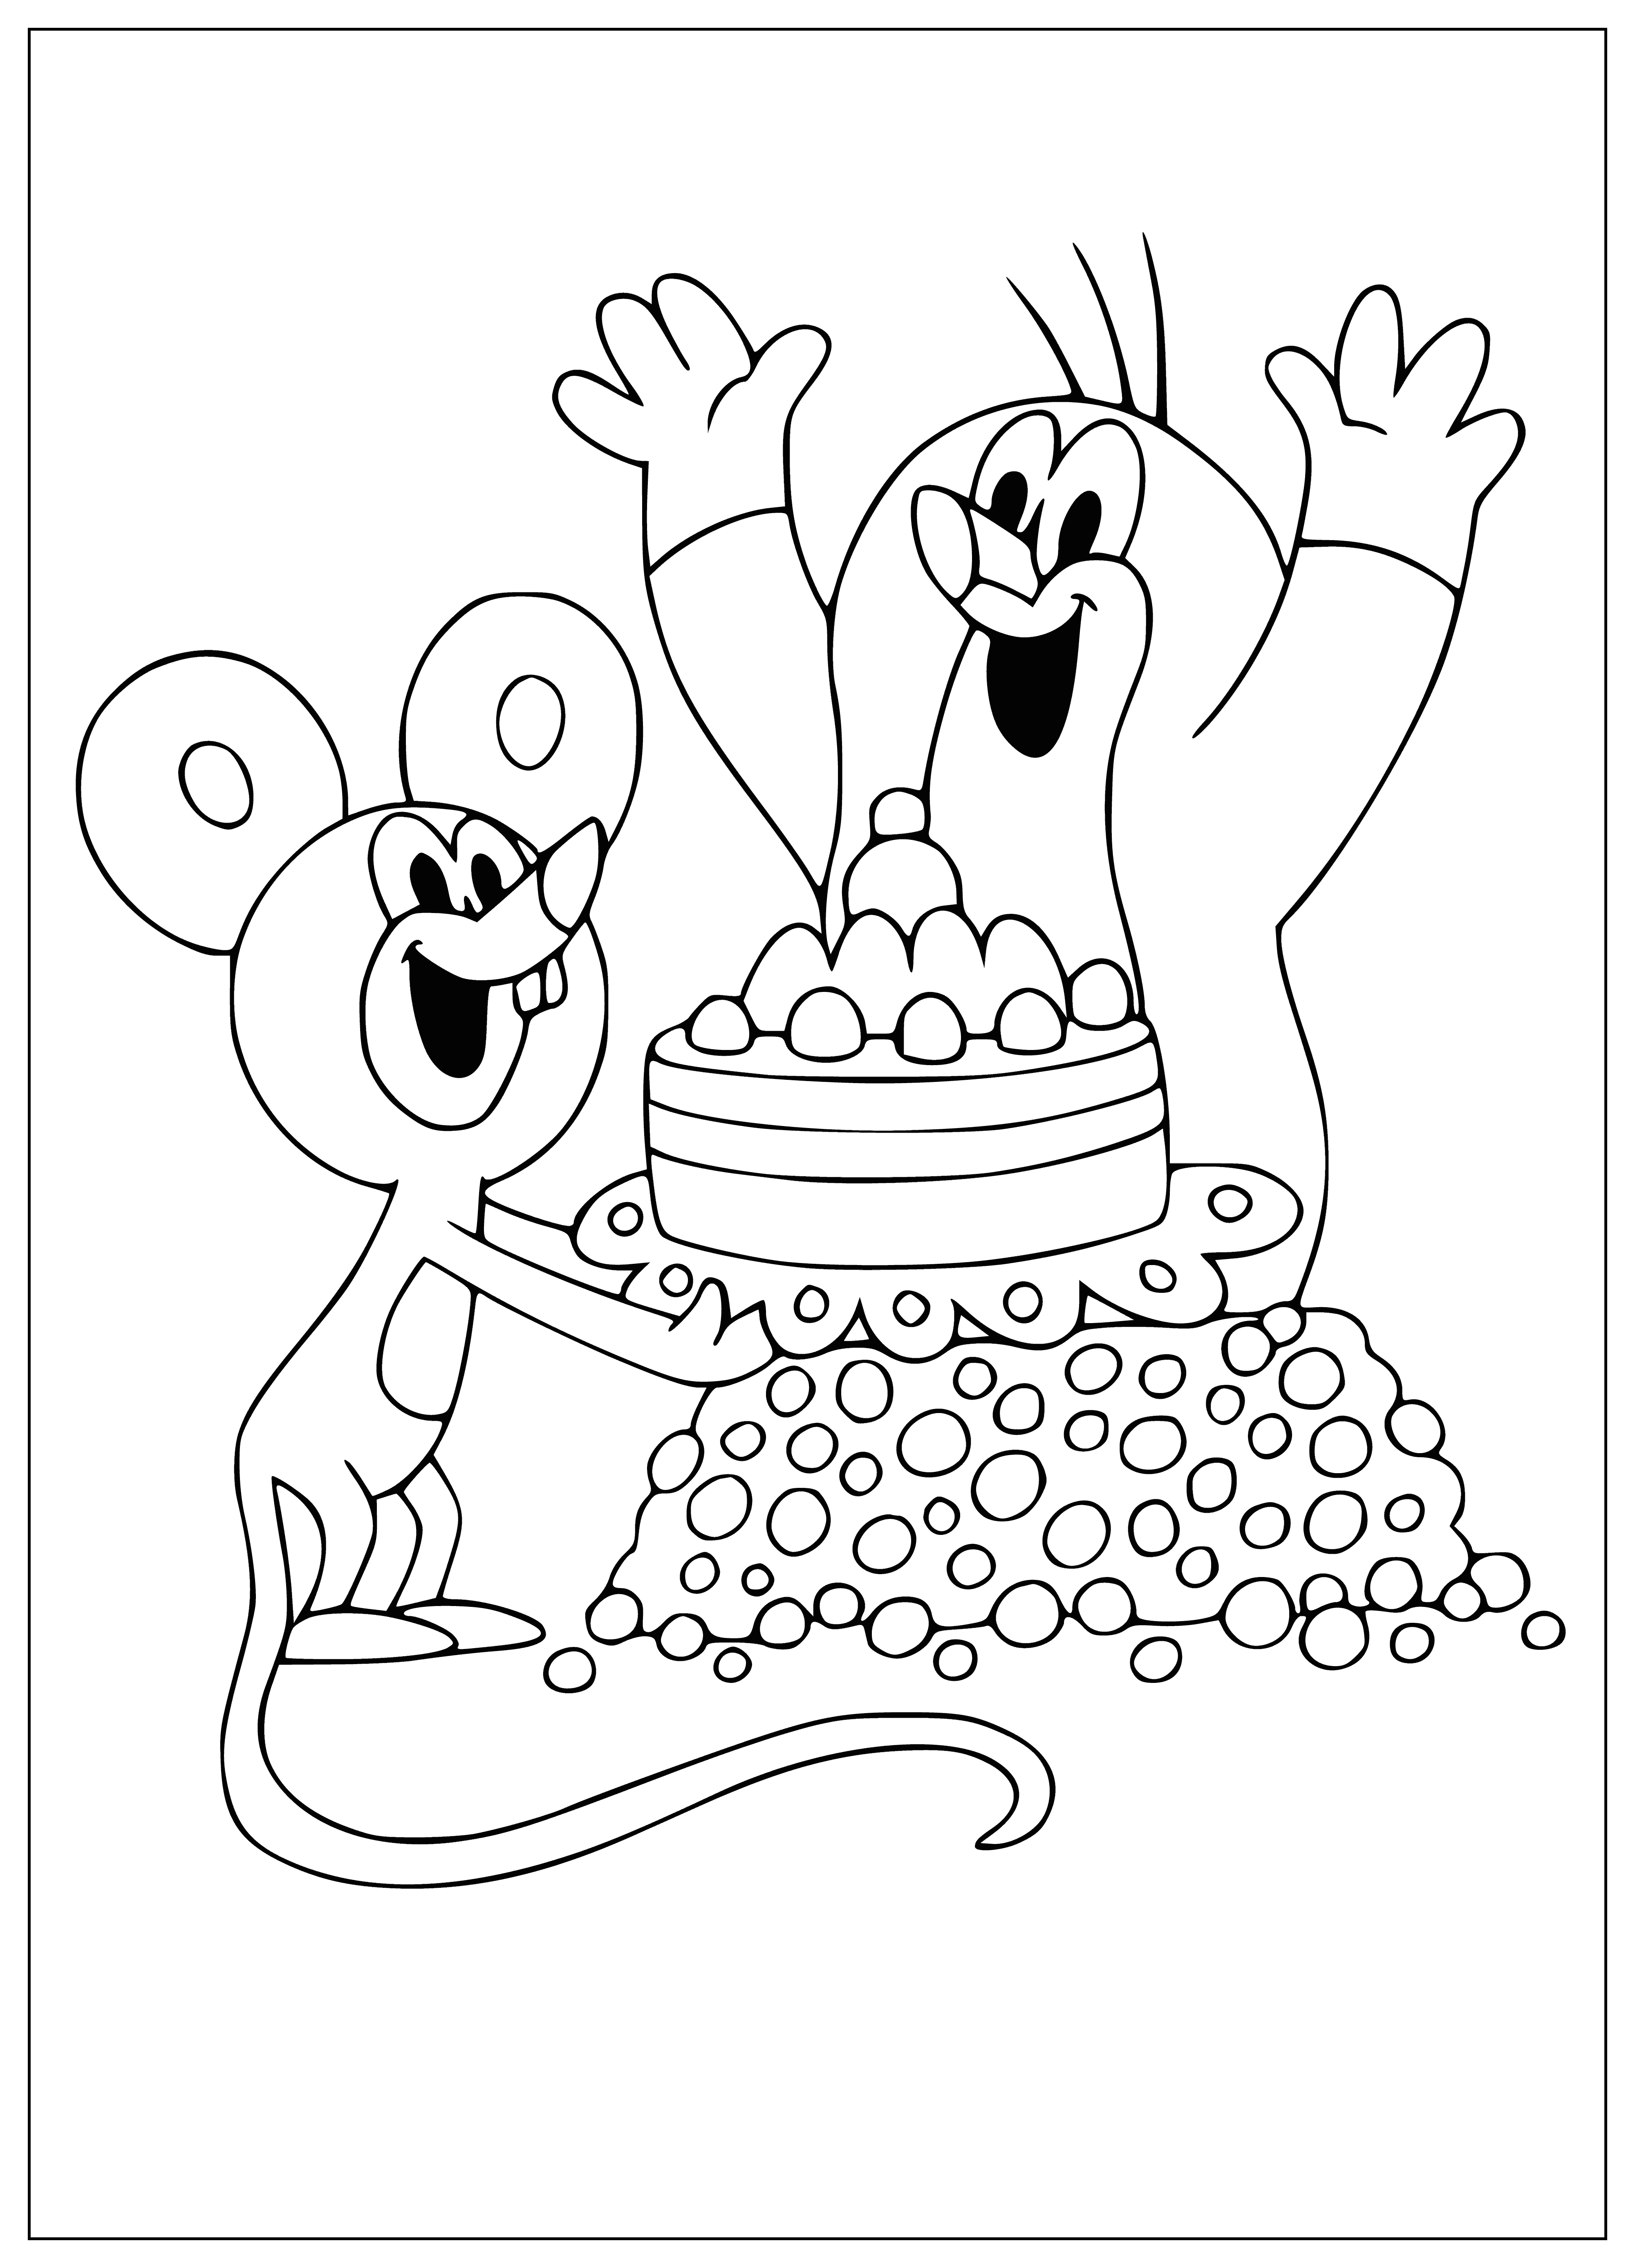 coloring page: Krtek is about to blow out candles on a large cake surrounded by other smaller cakes. Seems like a sweet celebration! #Krtek #CakeCelebration